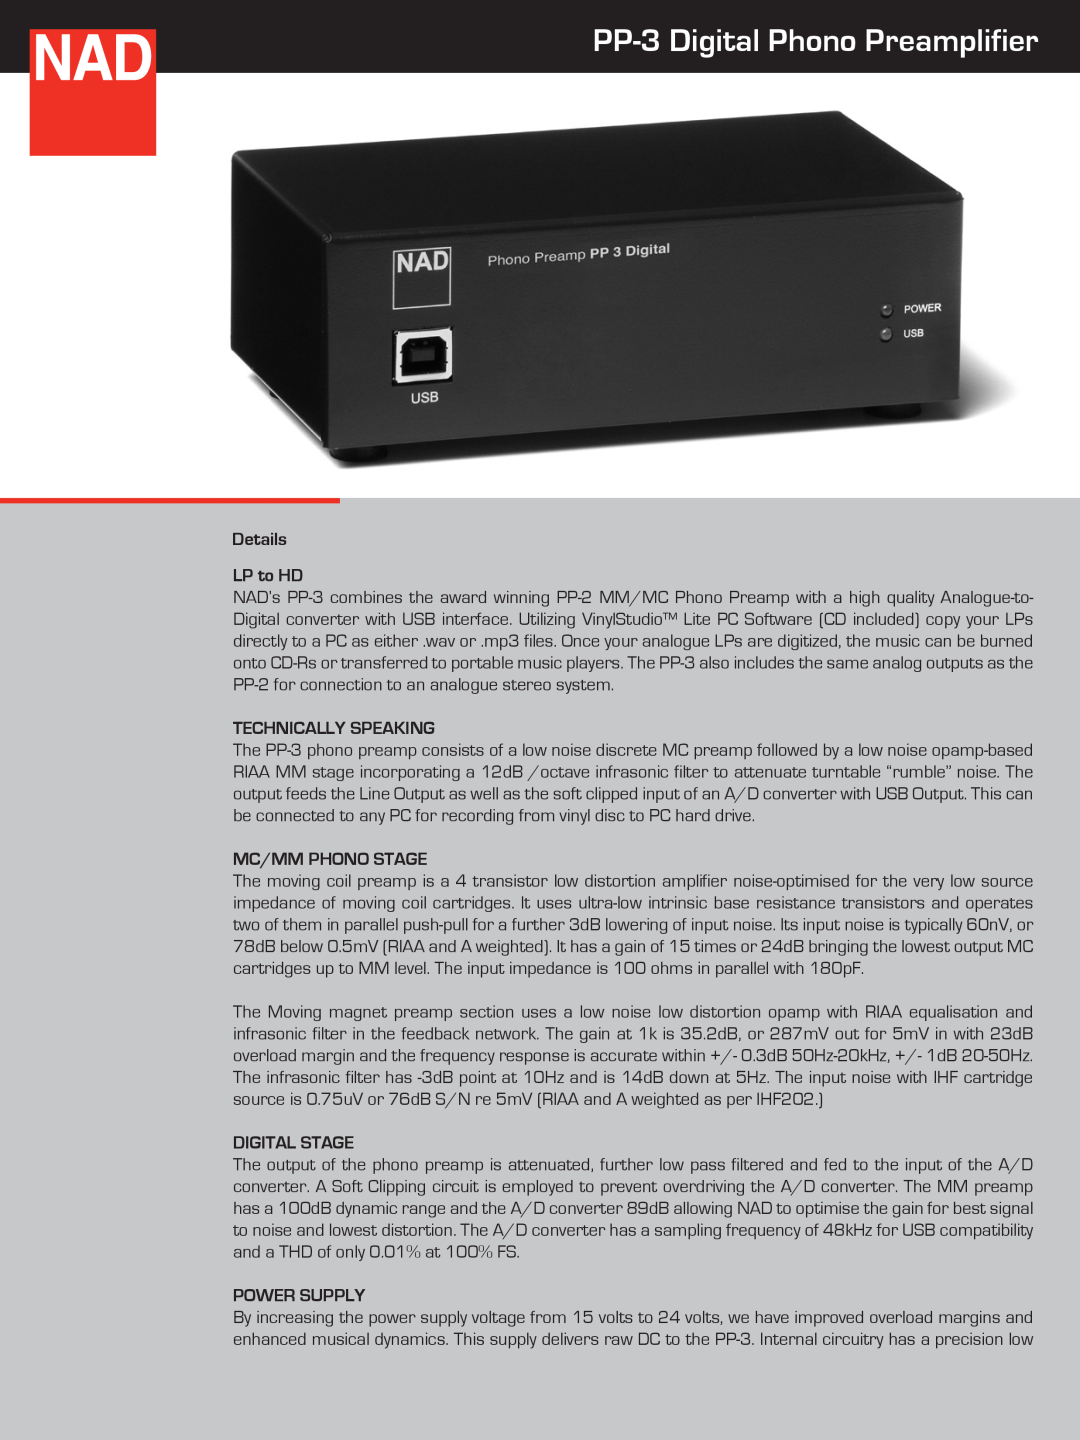 NAD PP-3 manual Details LP to HD, Technically Speaking, Mc/Mm Phono Stage, Digital Stage, Power Supply 